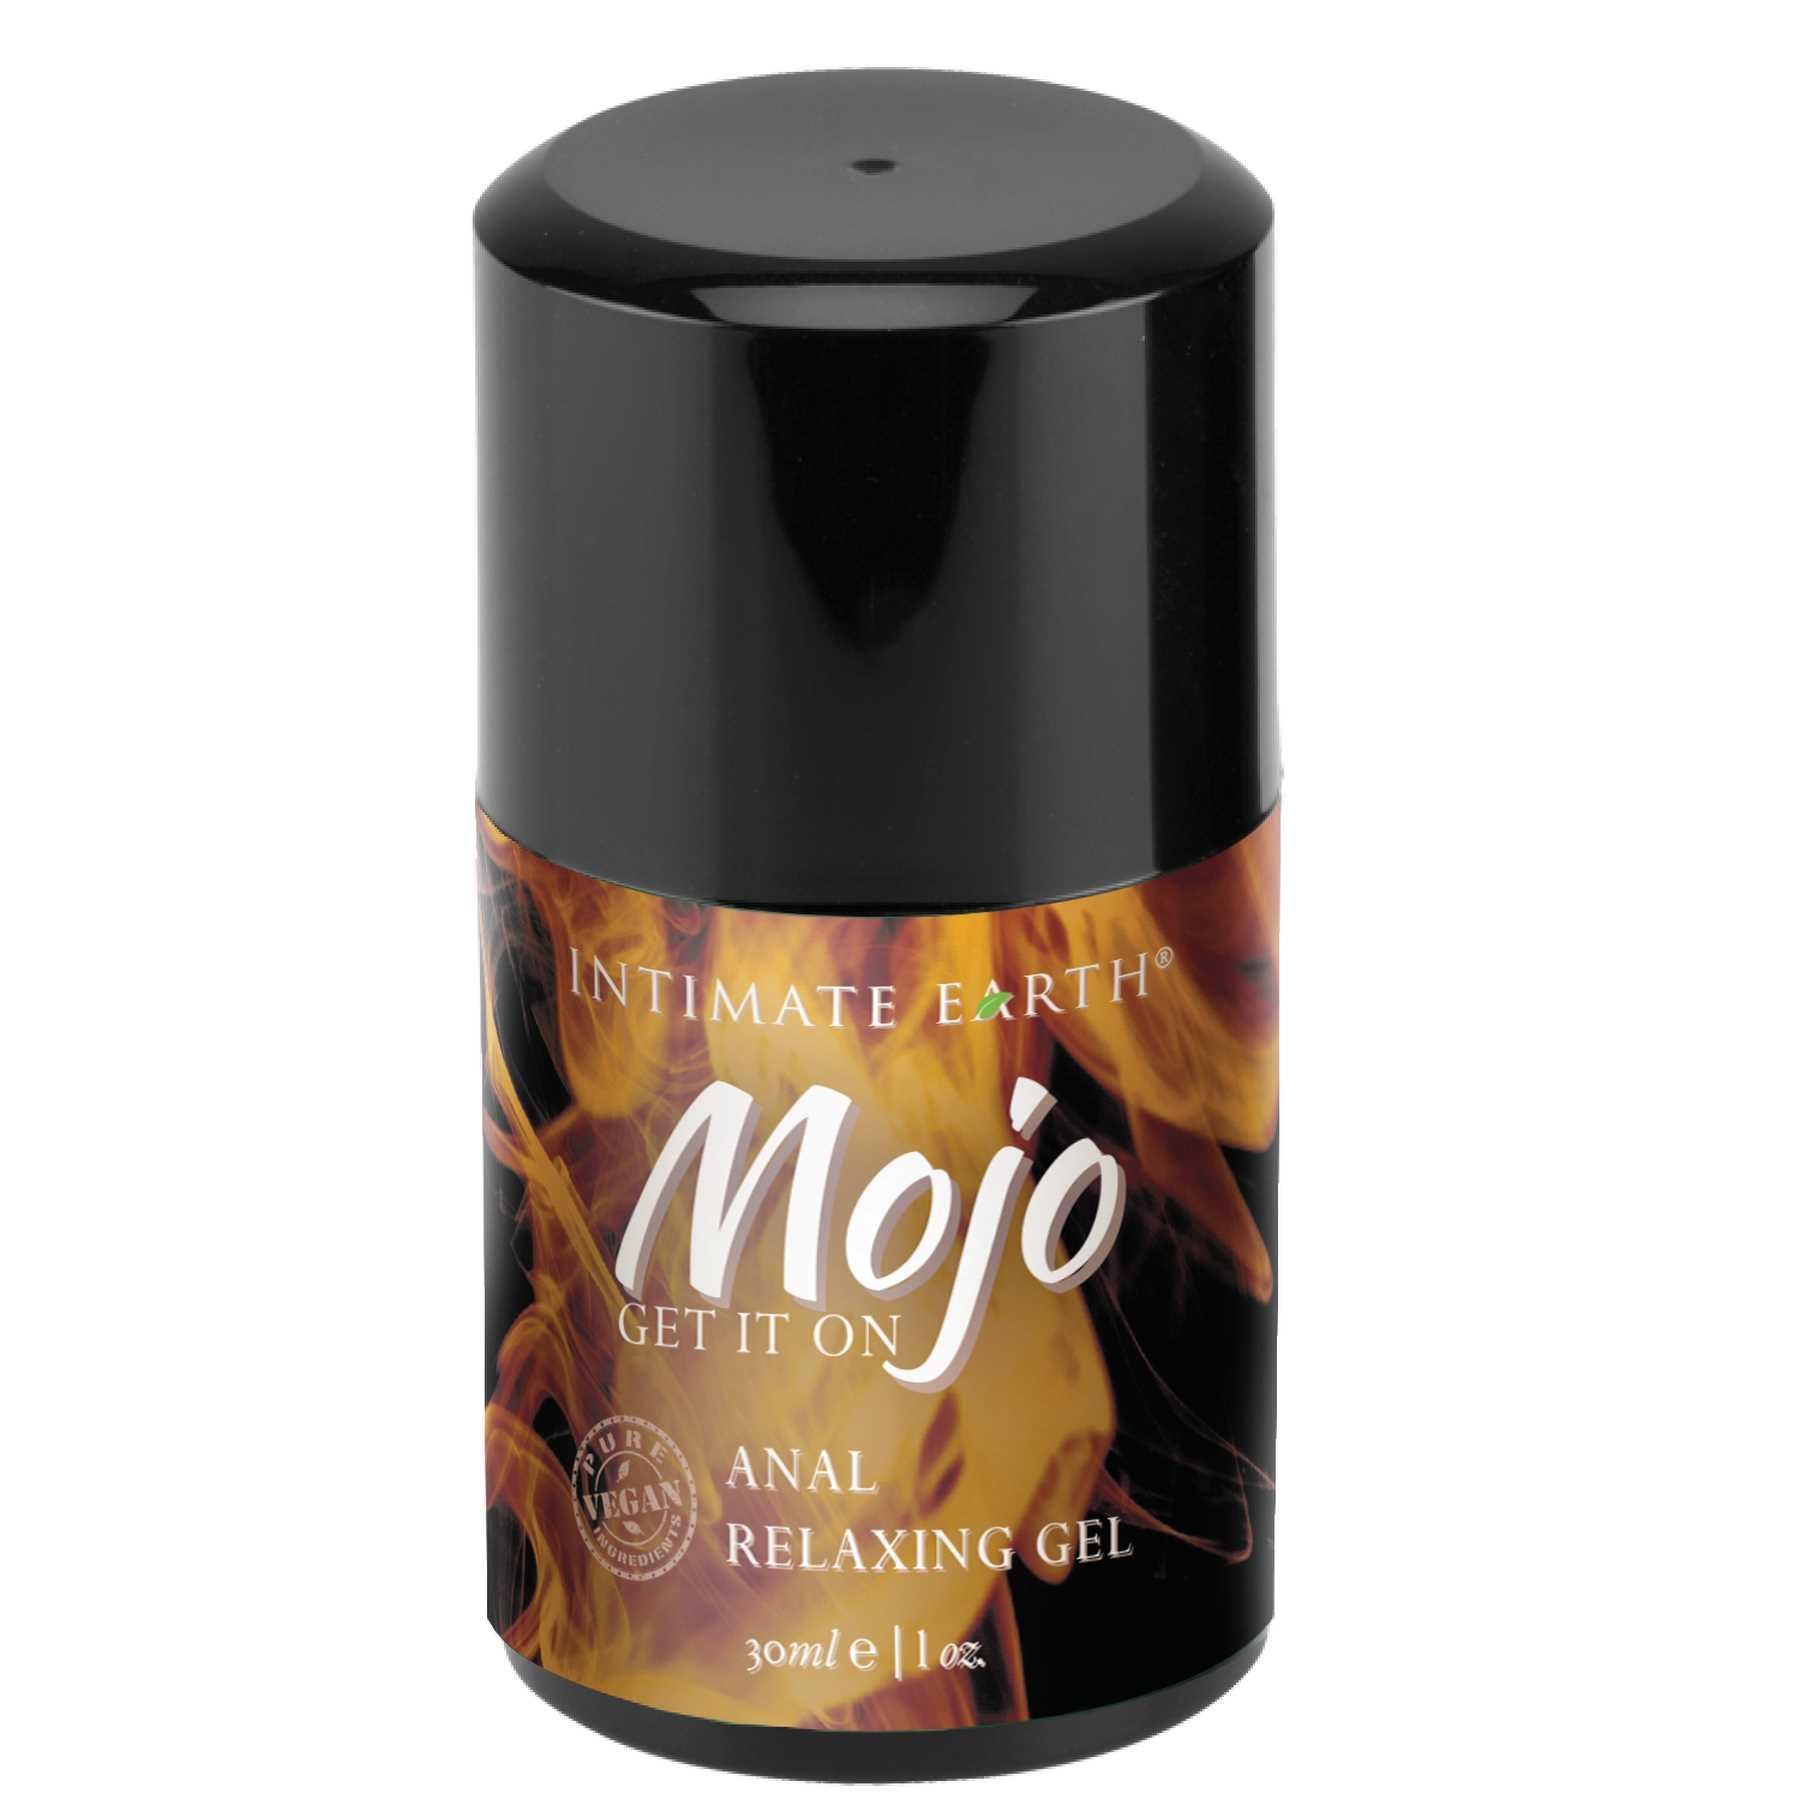 INTIMATE EARTH MOJO NATURAL ANAL RELAXING GEL